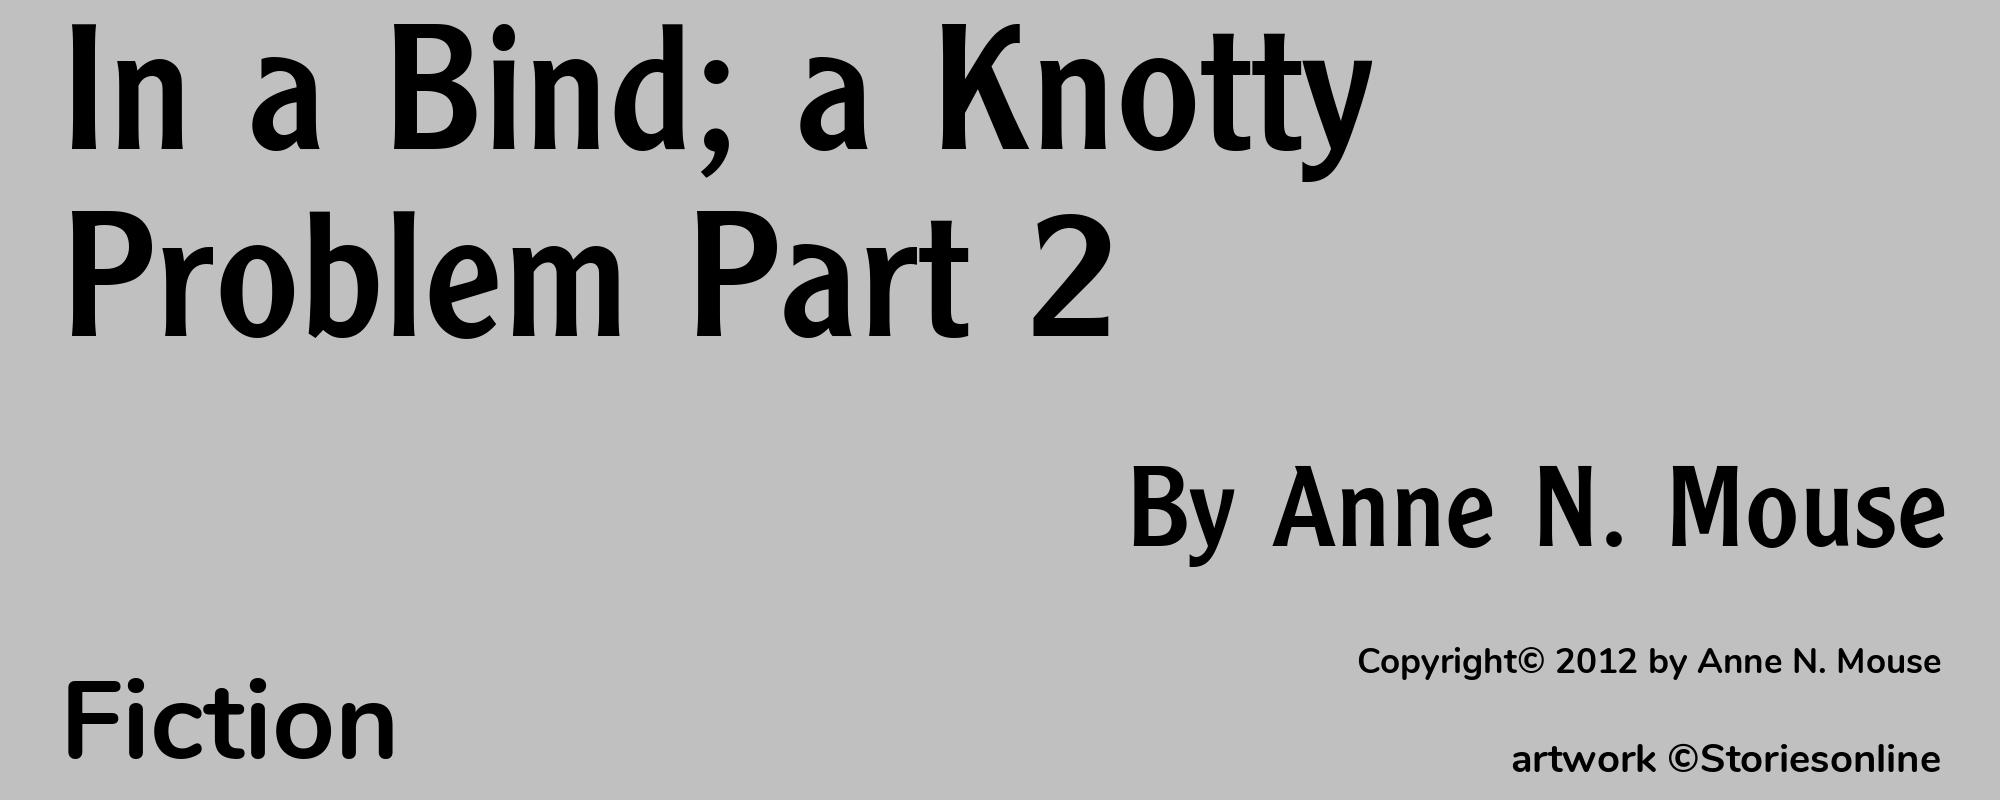 In a Bind; a Knotty Problem Part 2 - Cover